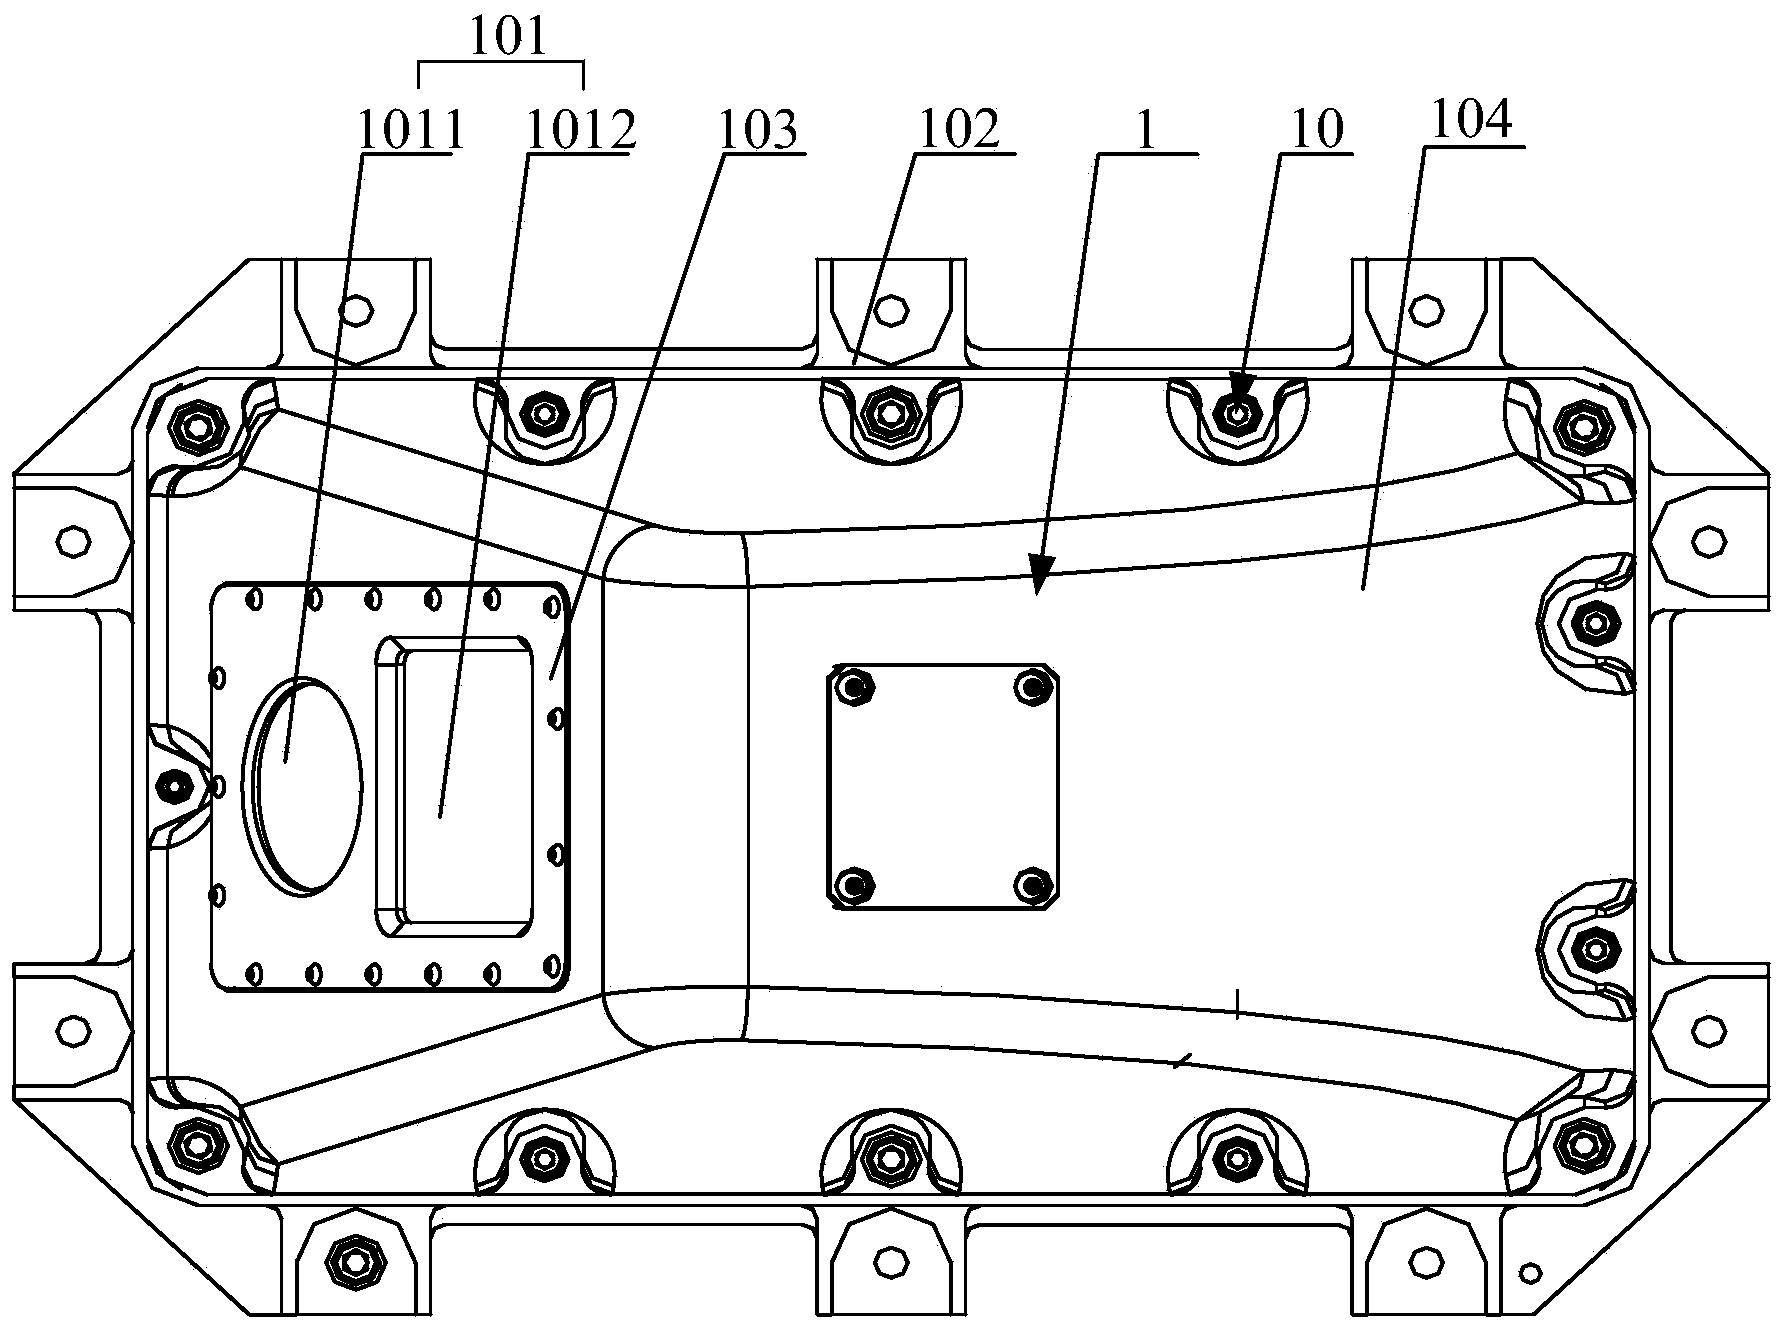 Pantograph-catenary monitoring device and system